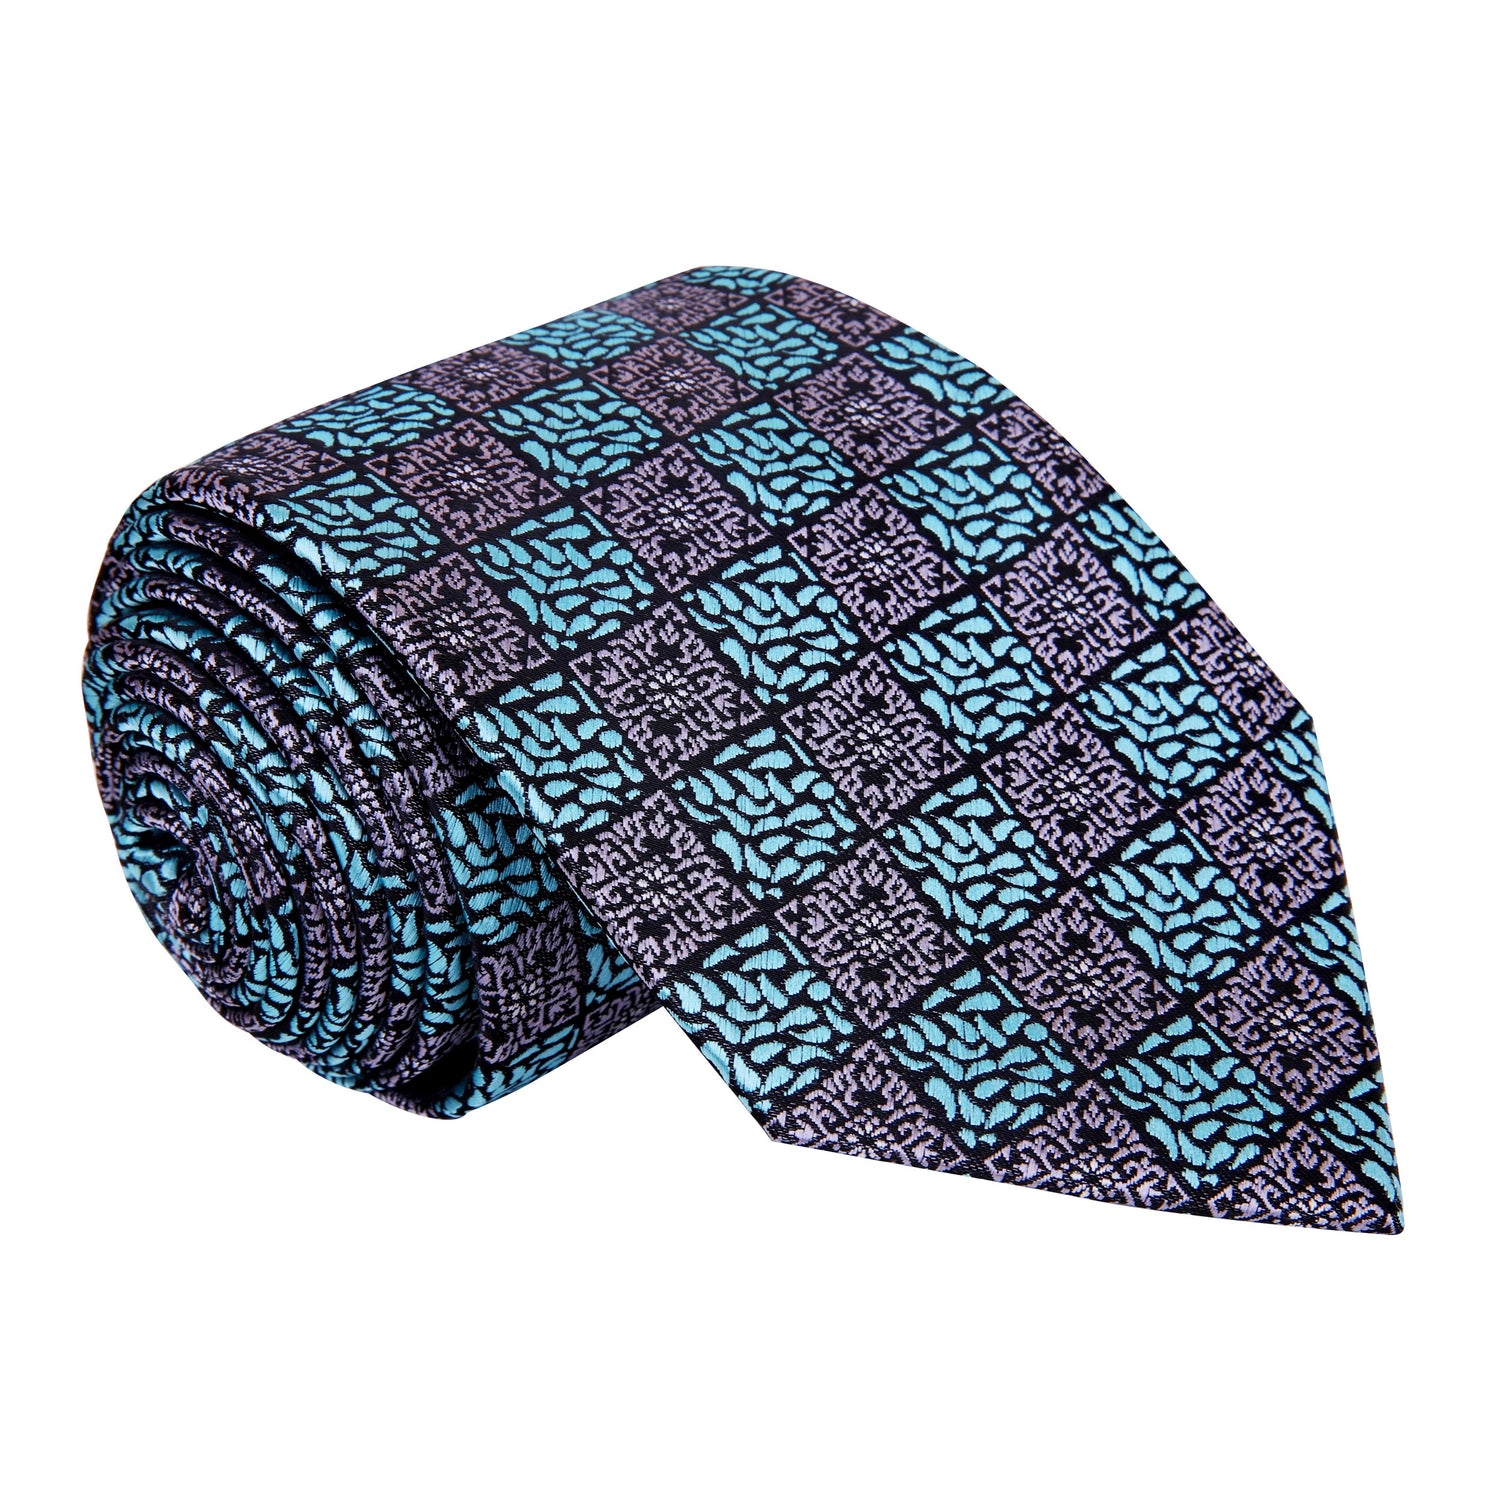 View 3: A Teal And Grey Geometric With Paisley Pattern Silk Necktie.